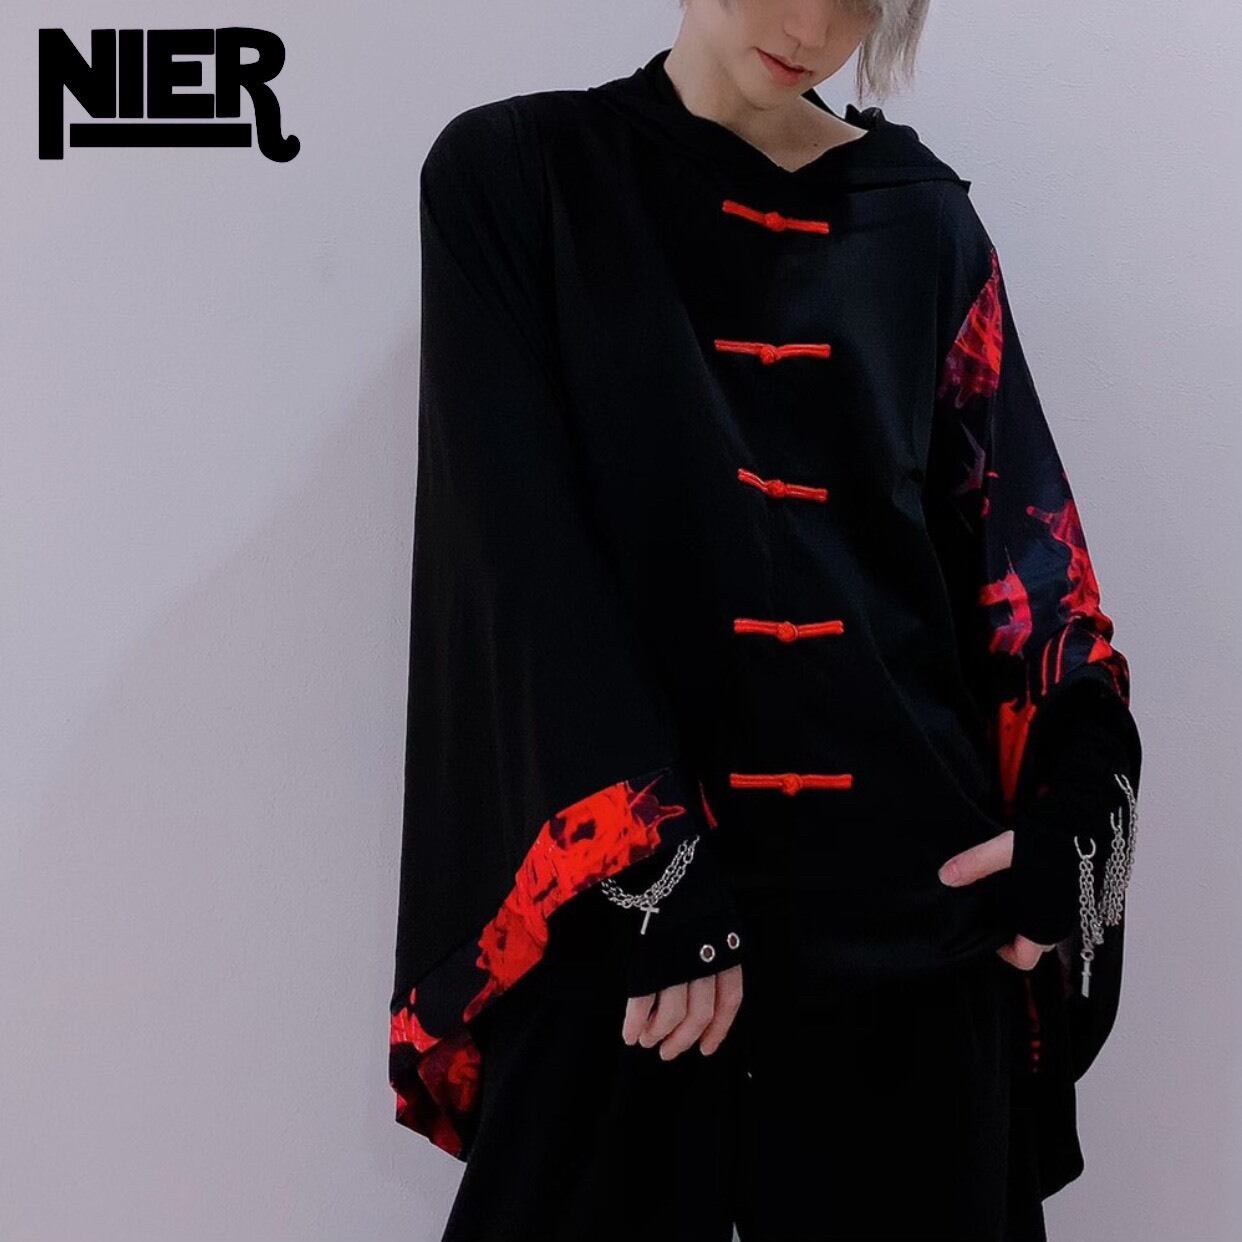 STRETCH PULLOVER着物風袖【彼岸花】FAKEチャイナボタン付き | NIER CLOTHING powered by BASE